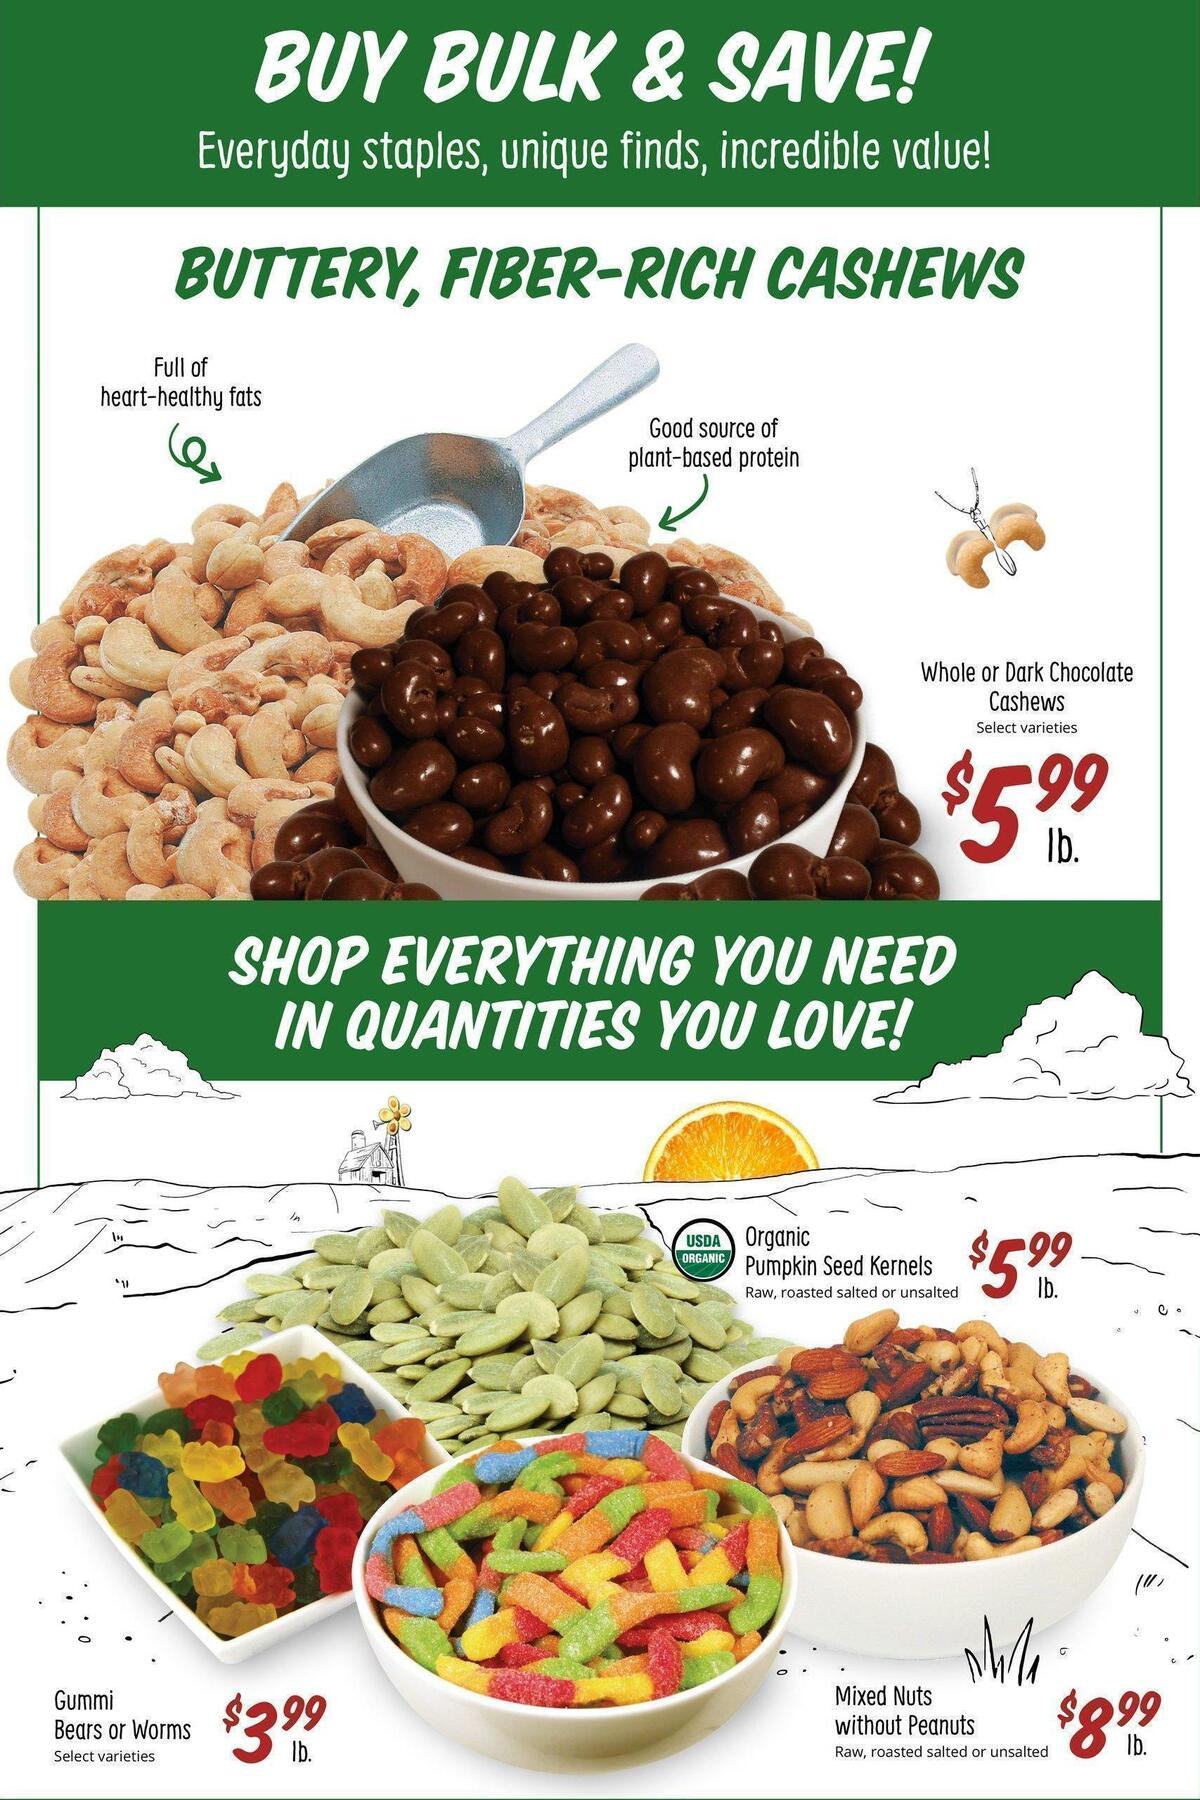 Sprouts Farmers Market Weekly Ad from June 14